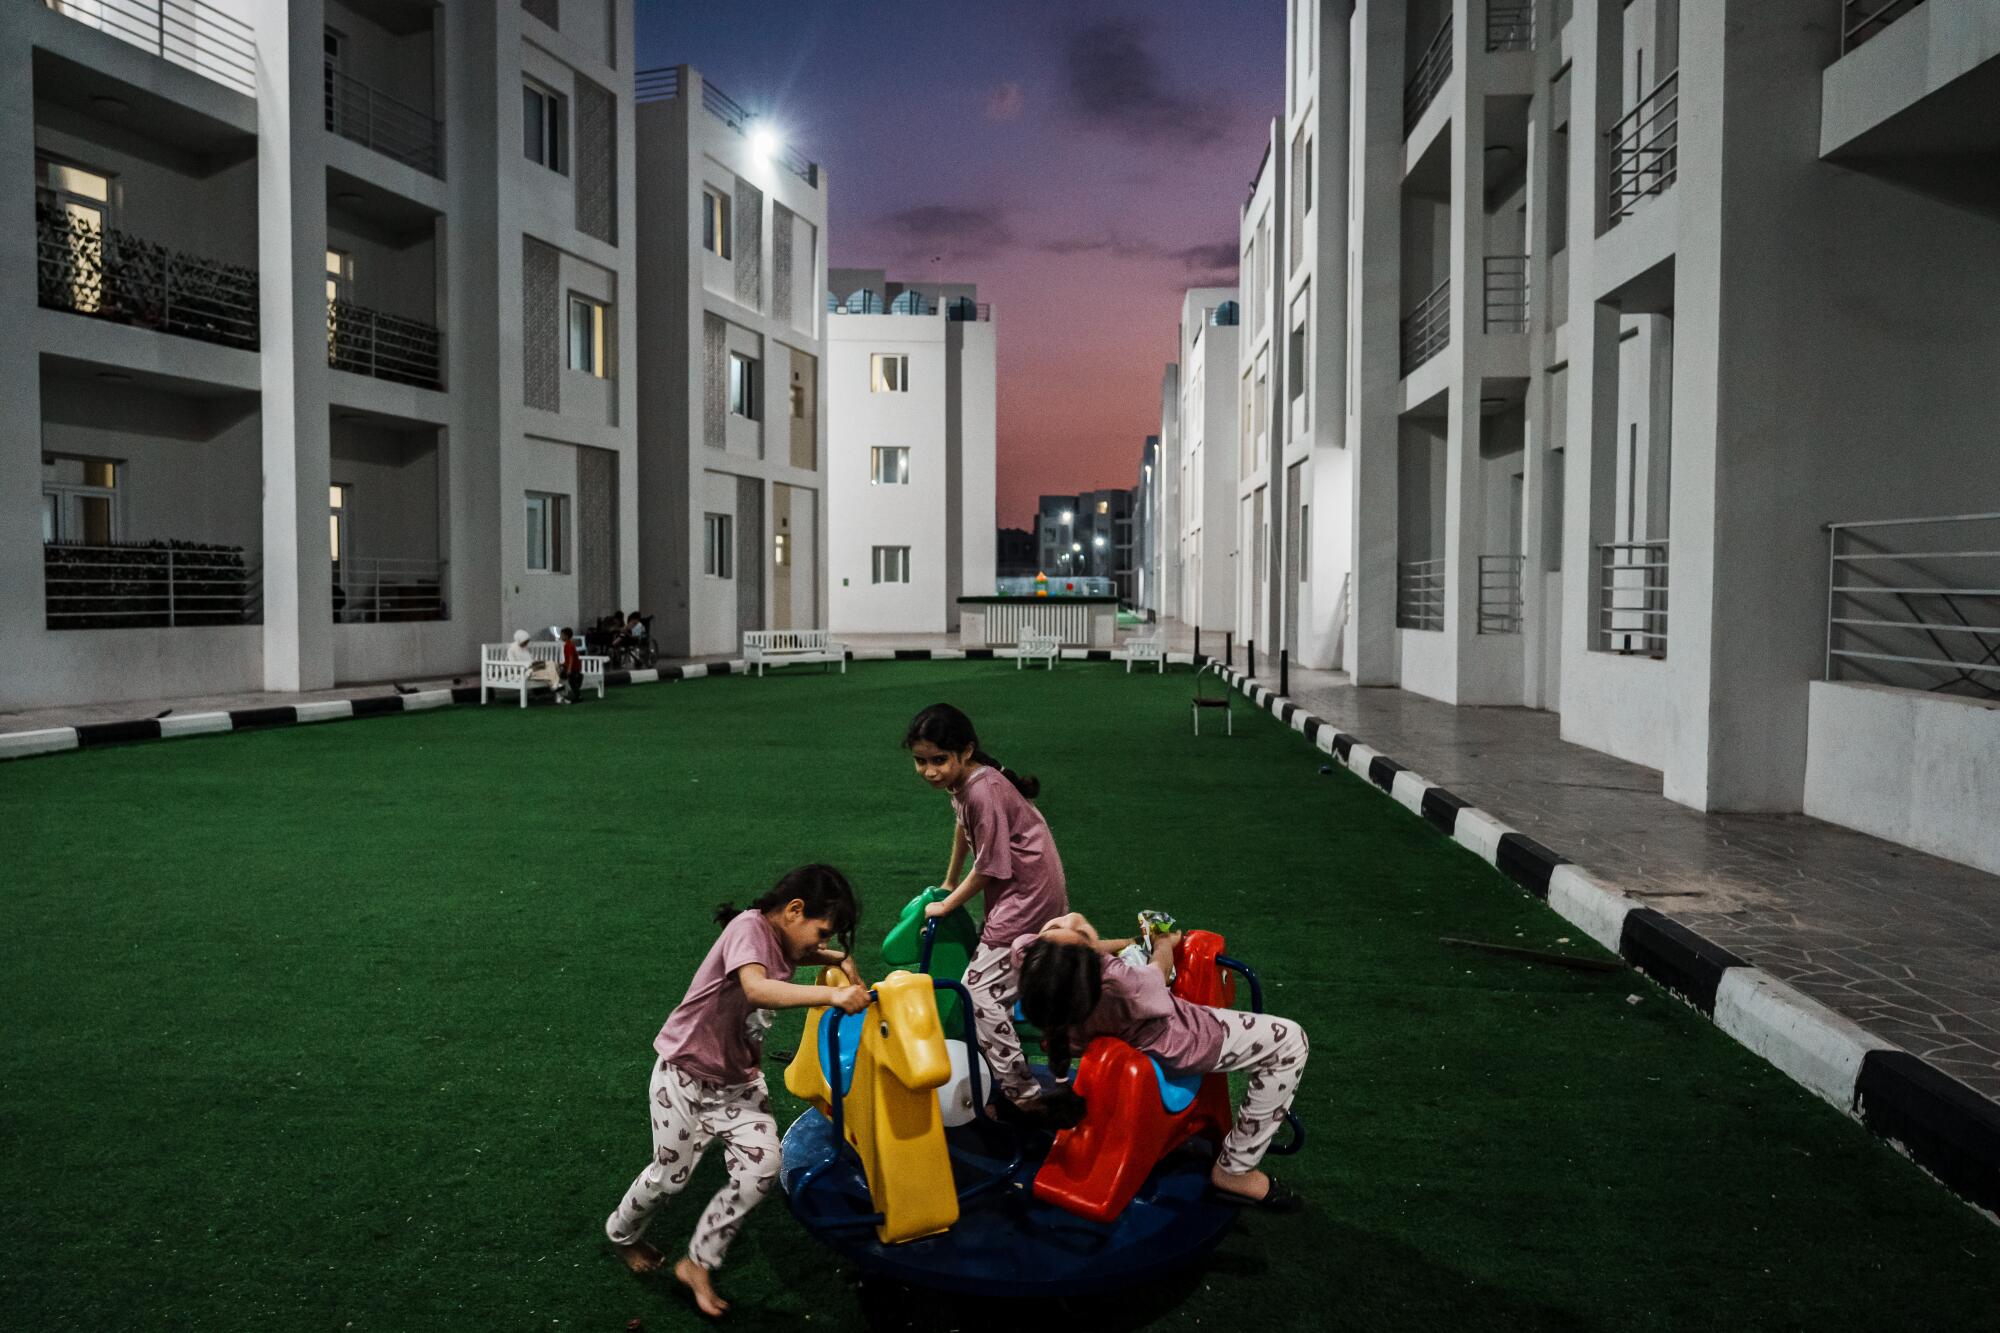 Three children play in the evening on a long stretch of artificial turf between apartment buildings